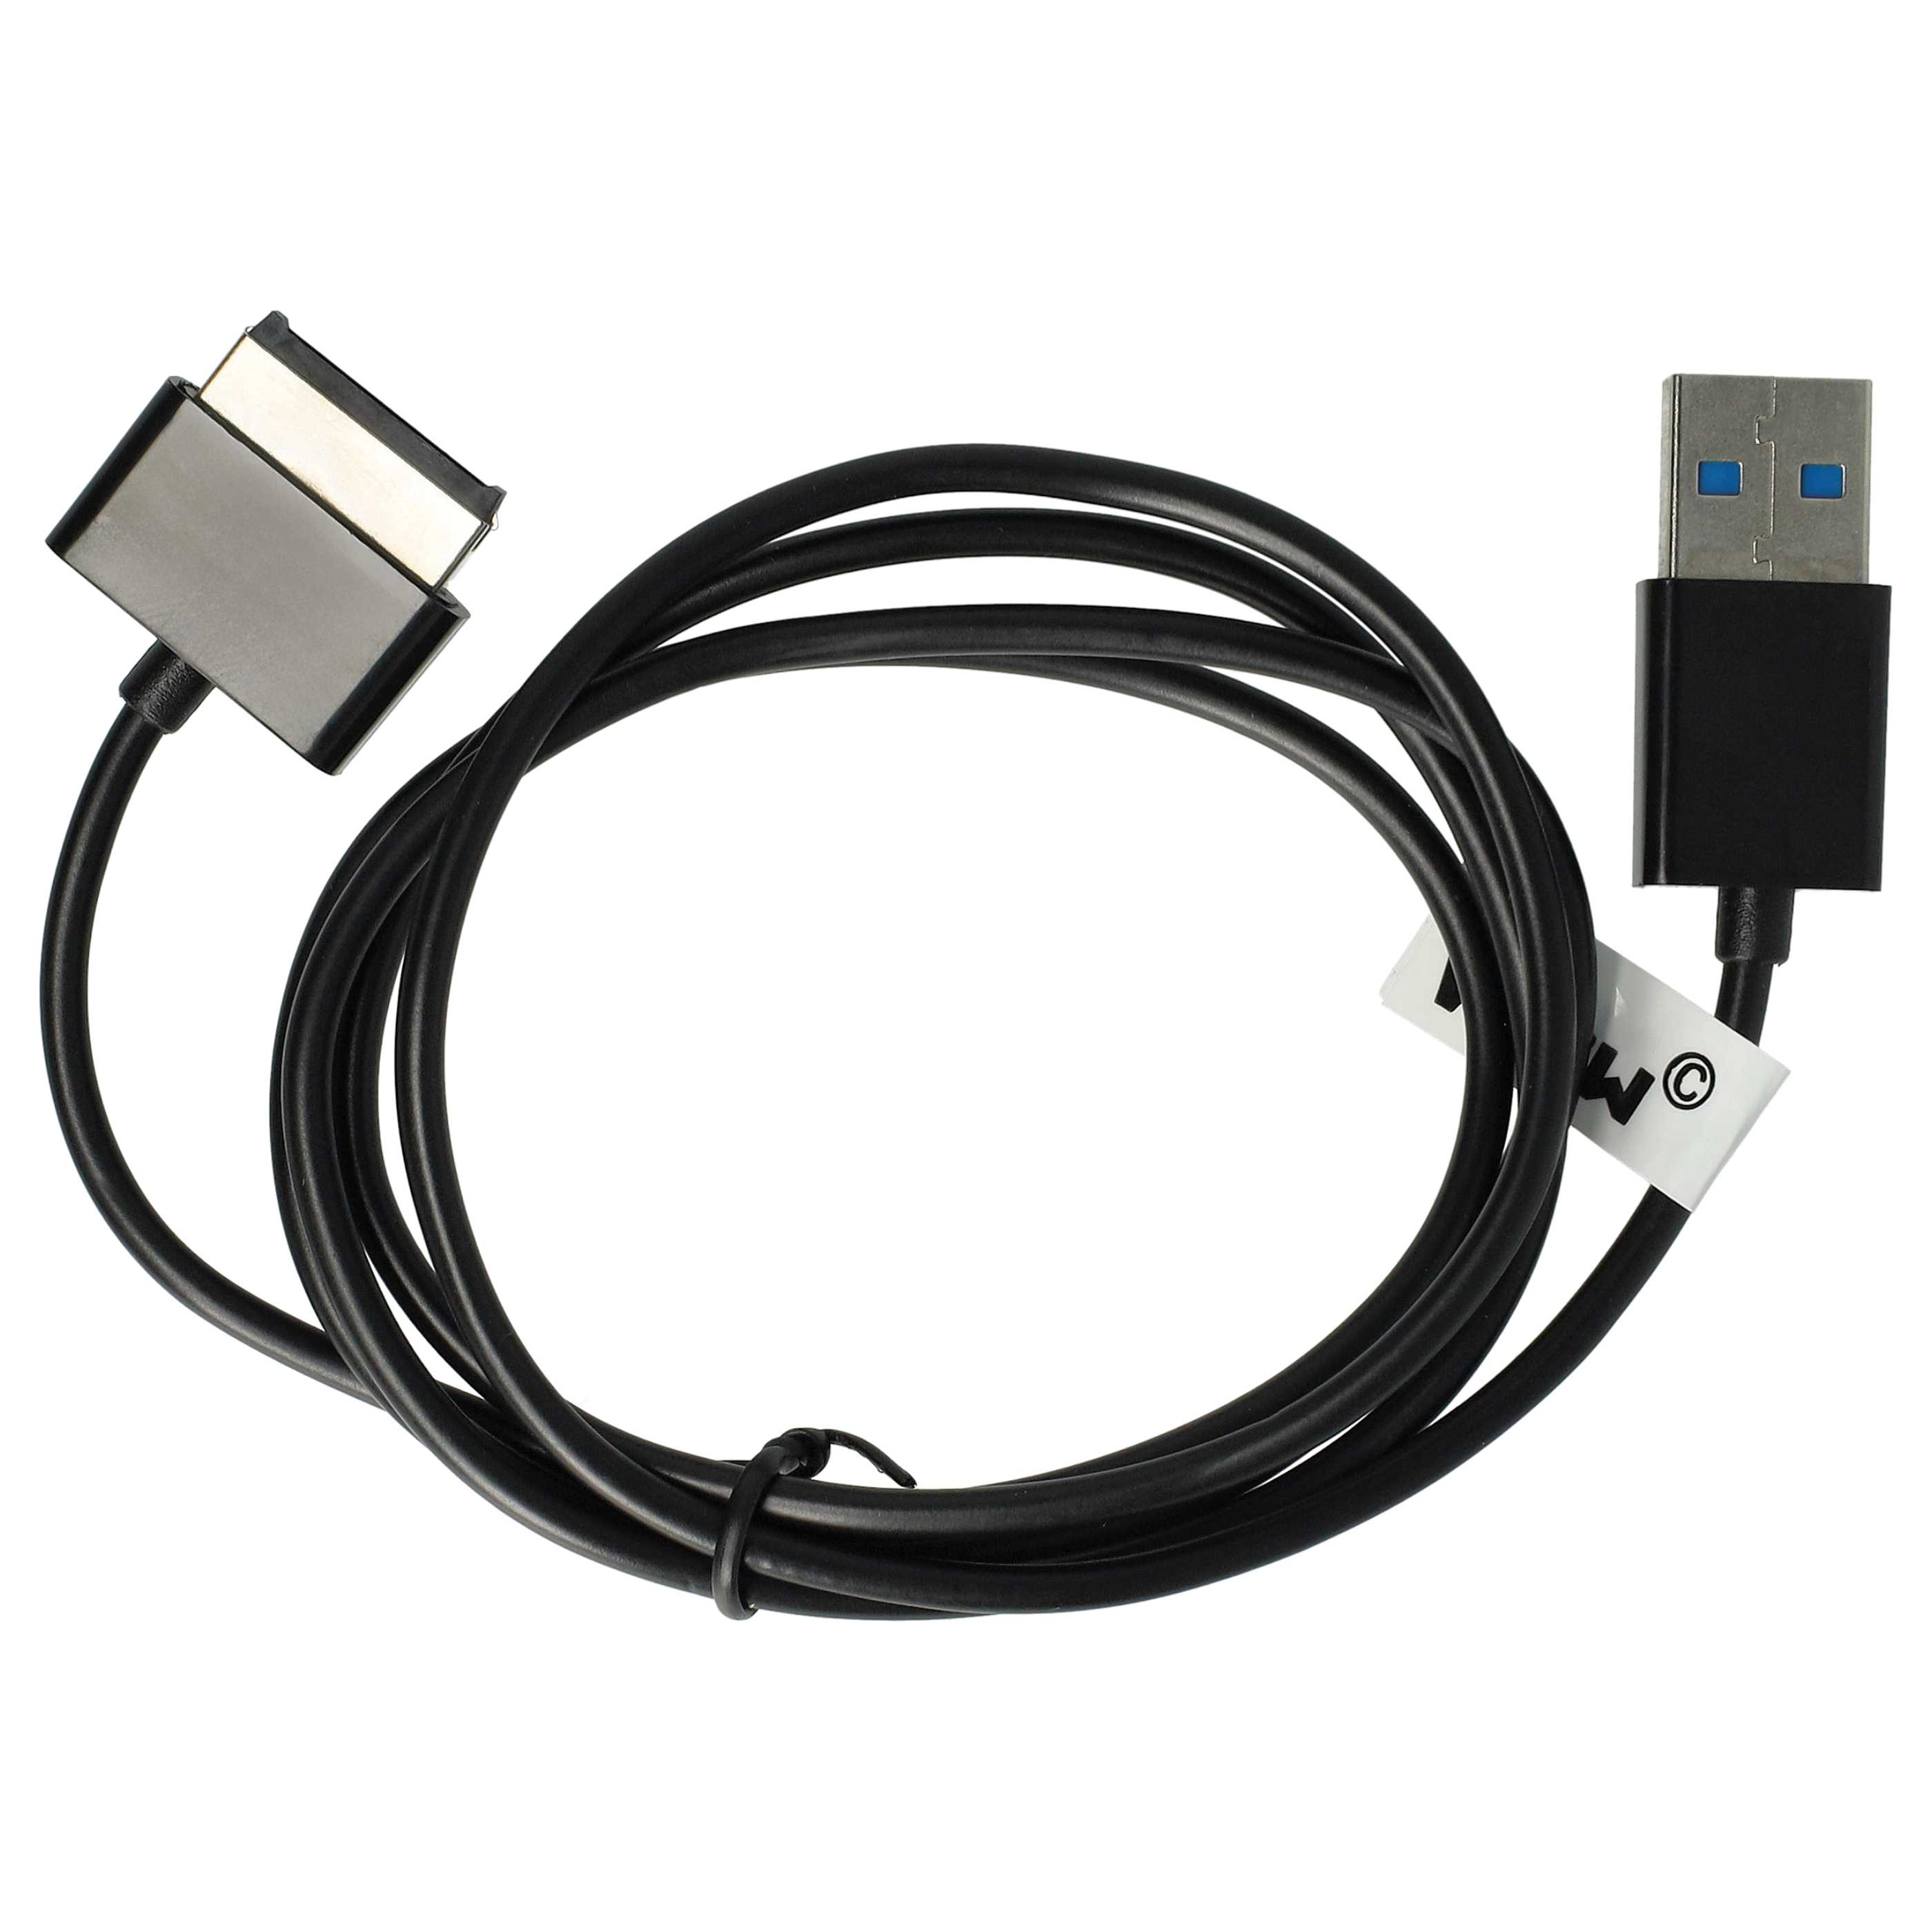 vhbw 1x USB Data Cable Tablet - 2in1 Charging Cable (Standard-USB Type A to Tablet) 100cm Black 